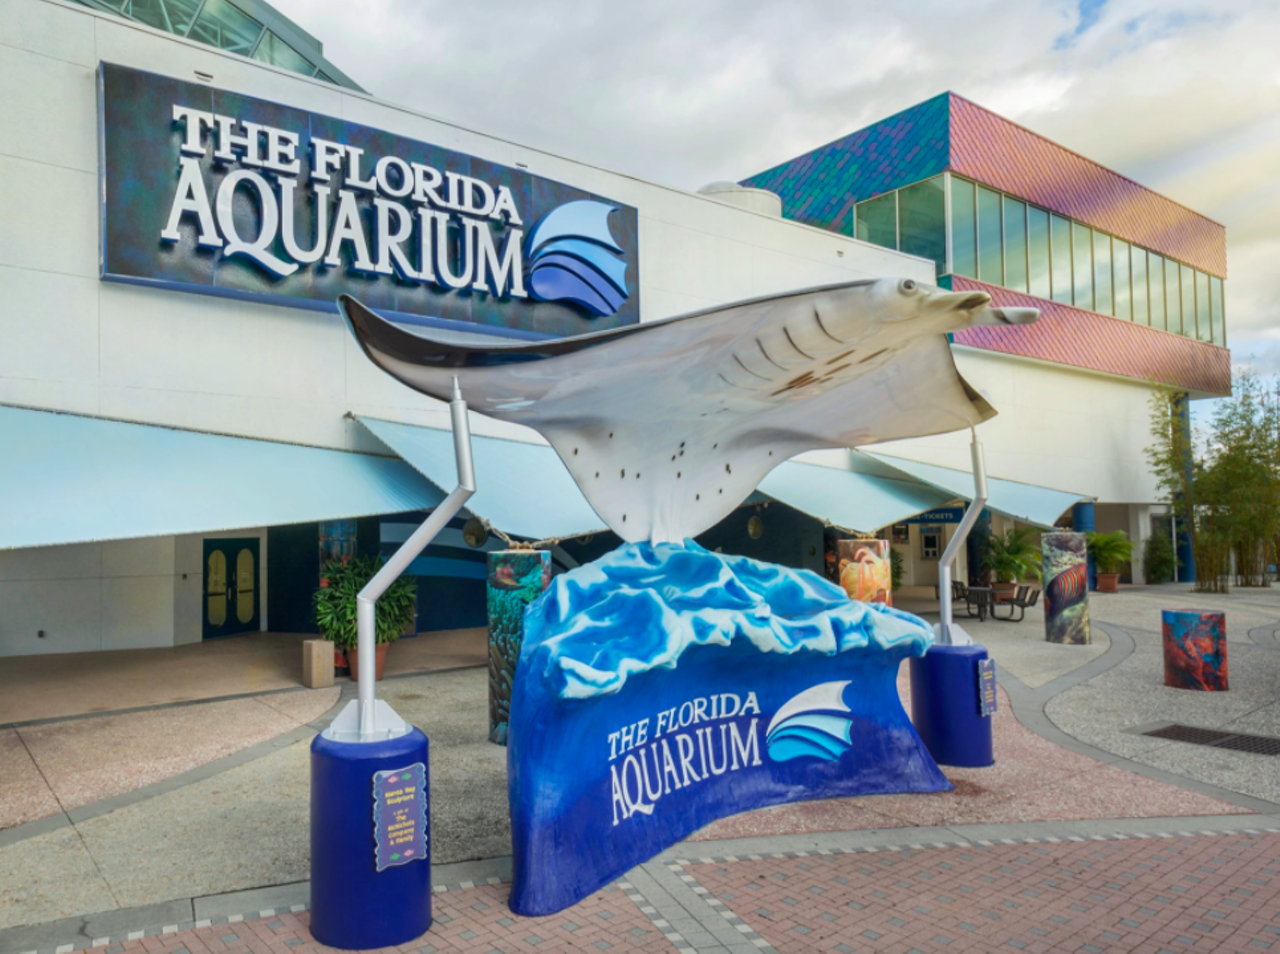 Make a reservation at the Florida Aquarium
701 Channelside Dr., Tampa, (813) 273-4000
The Florida Aquarium is a 250,000 square-foot aquarium located in the heart of Tampa Bay. The layout takes visitors from fresh-water springs to the Gulf of Mexico. Exhibits include a simulated beach, simulated wetlands and a 500,000-gallon coral reef. The aquarium's coronavirus procedure includes limited capacity, reservations and more.
Photos via Florida Aquarium/Facebook